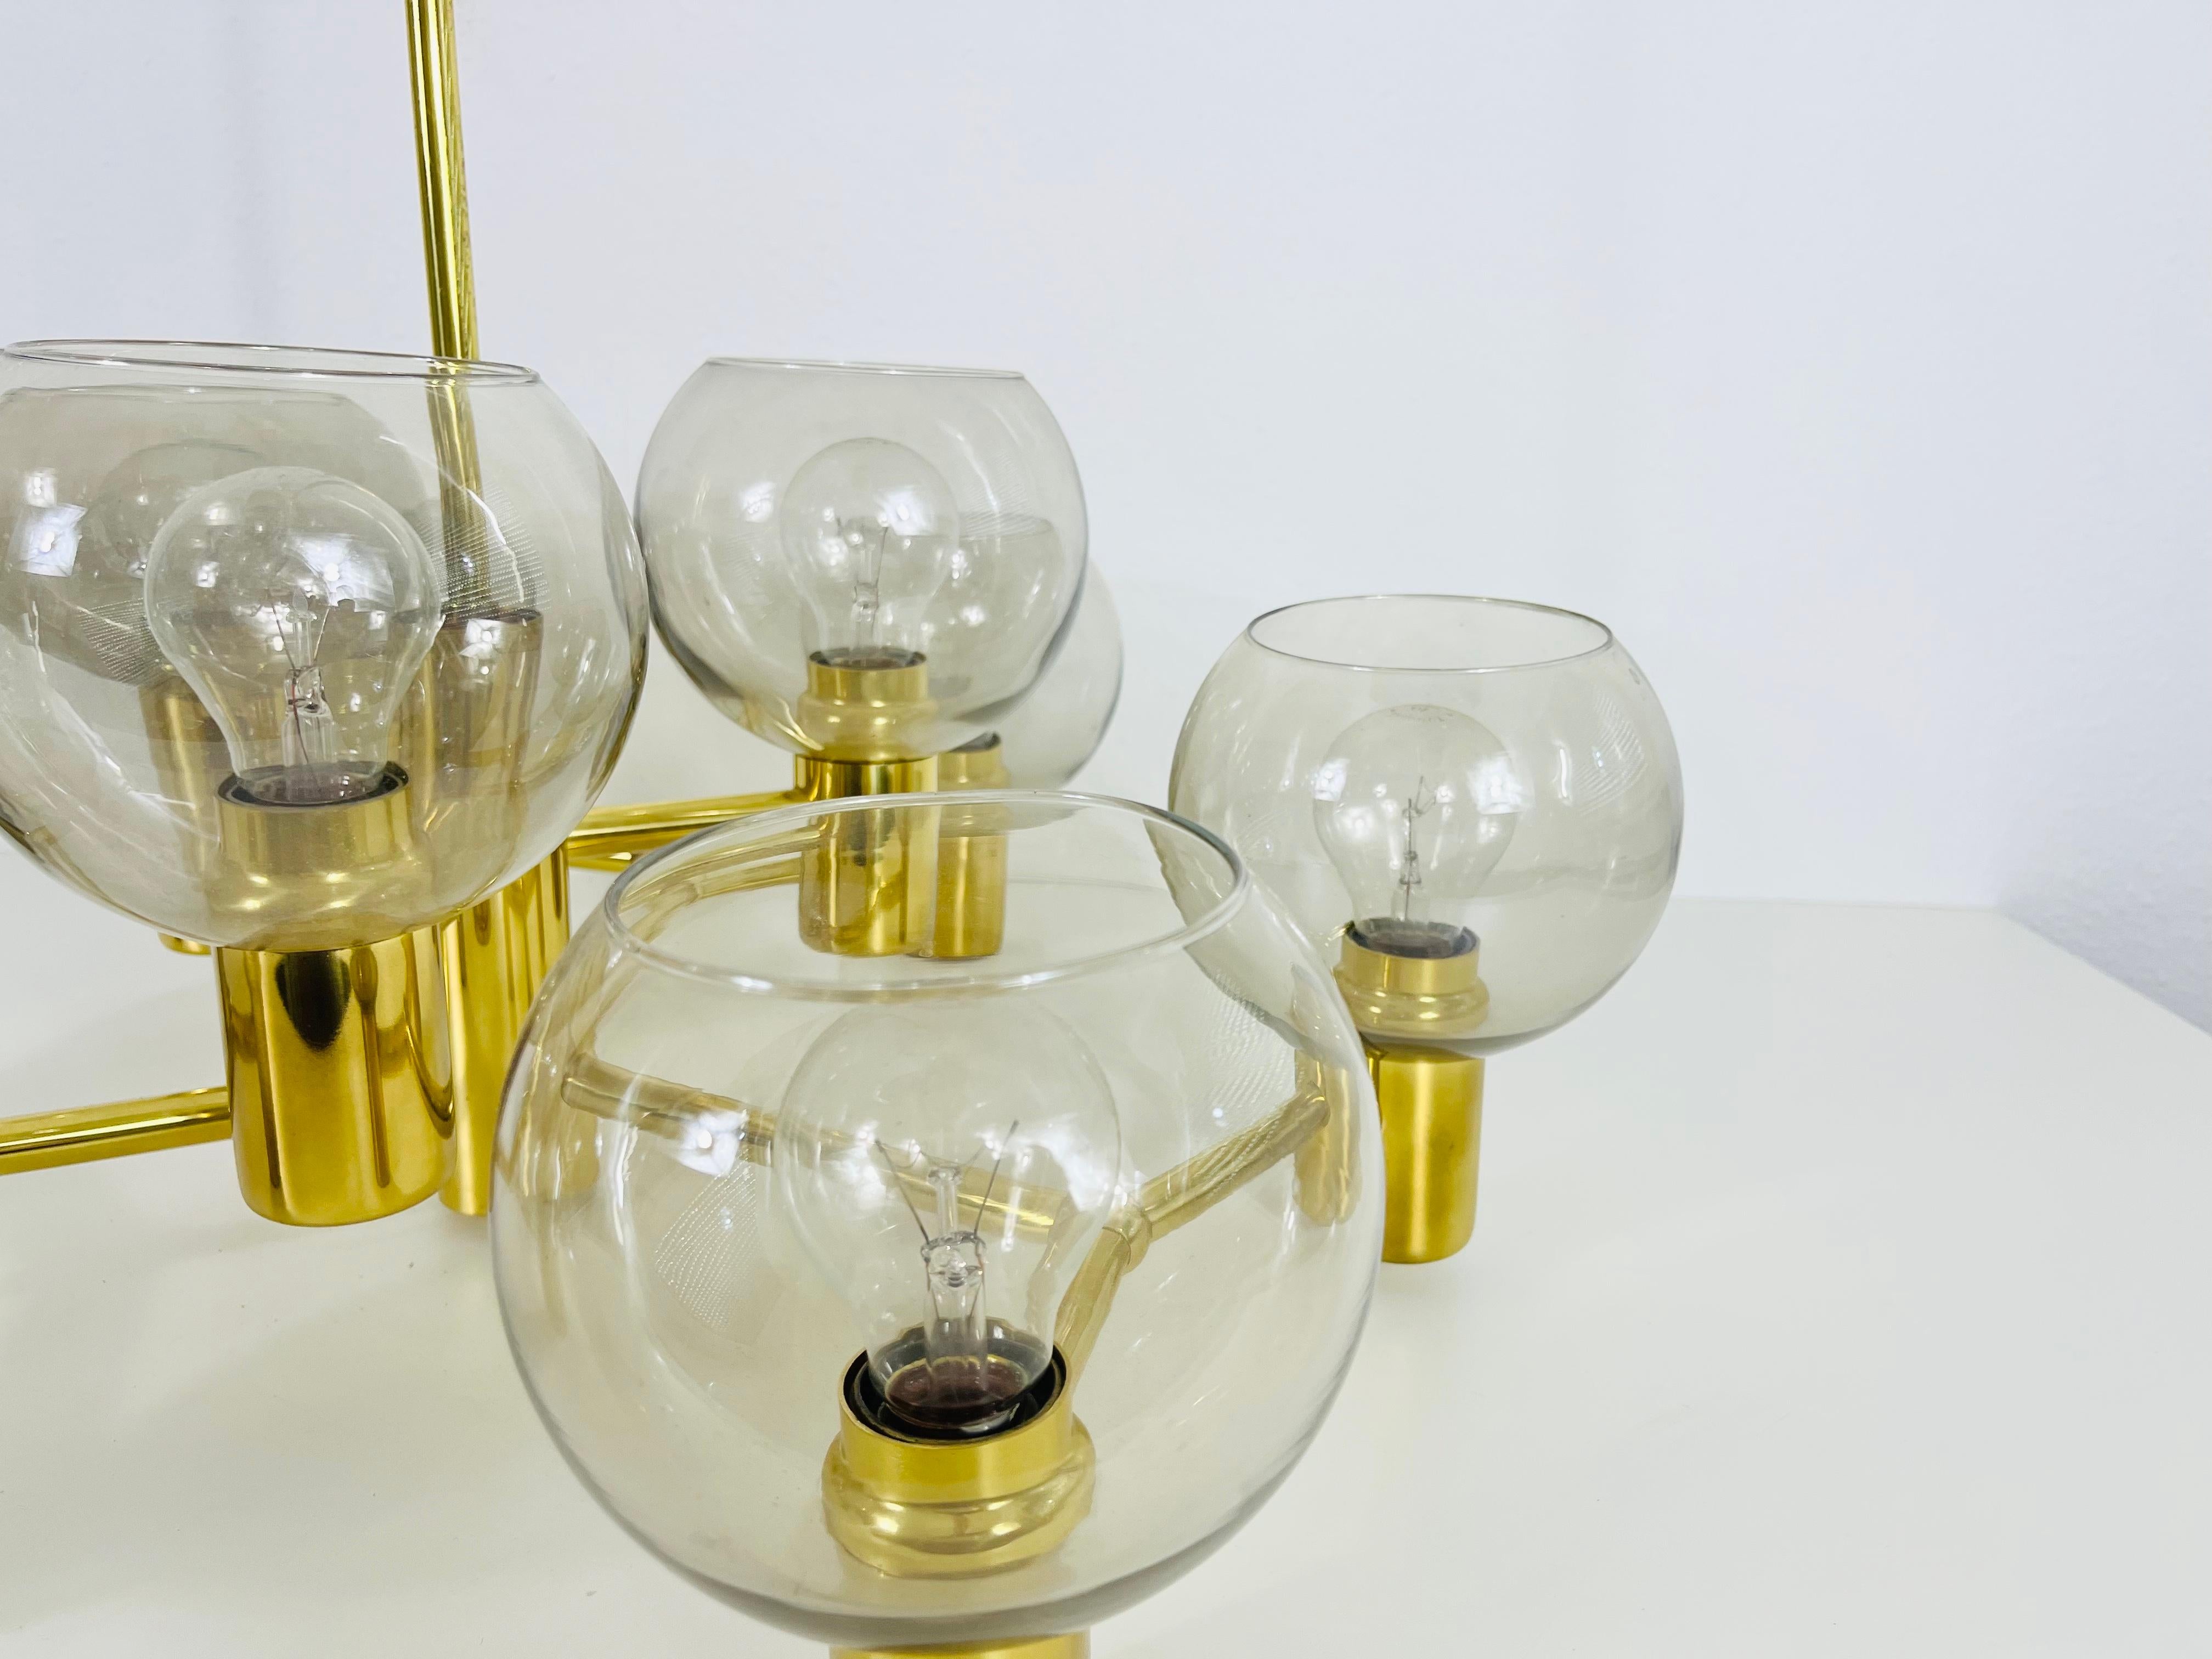 Monumental Swedish Mid-Century Modern Brass and Glass Chandelier, 1960s For Sale 3